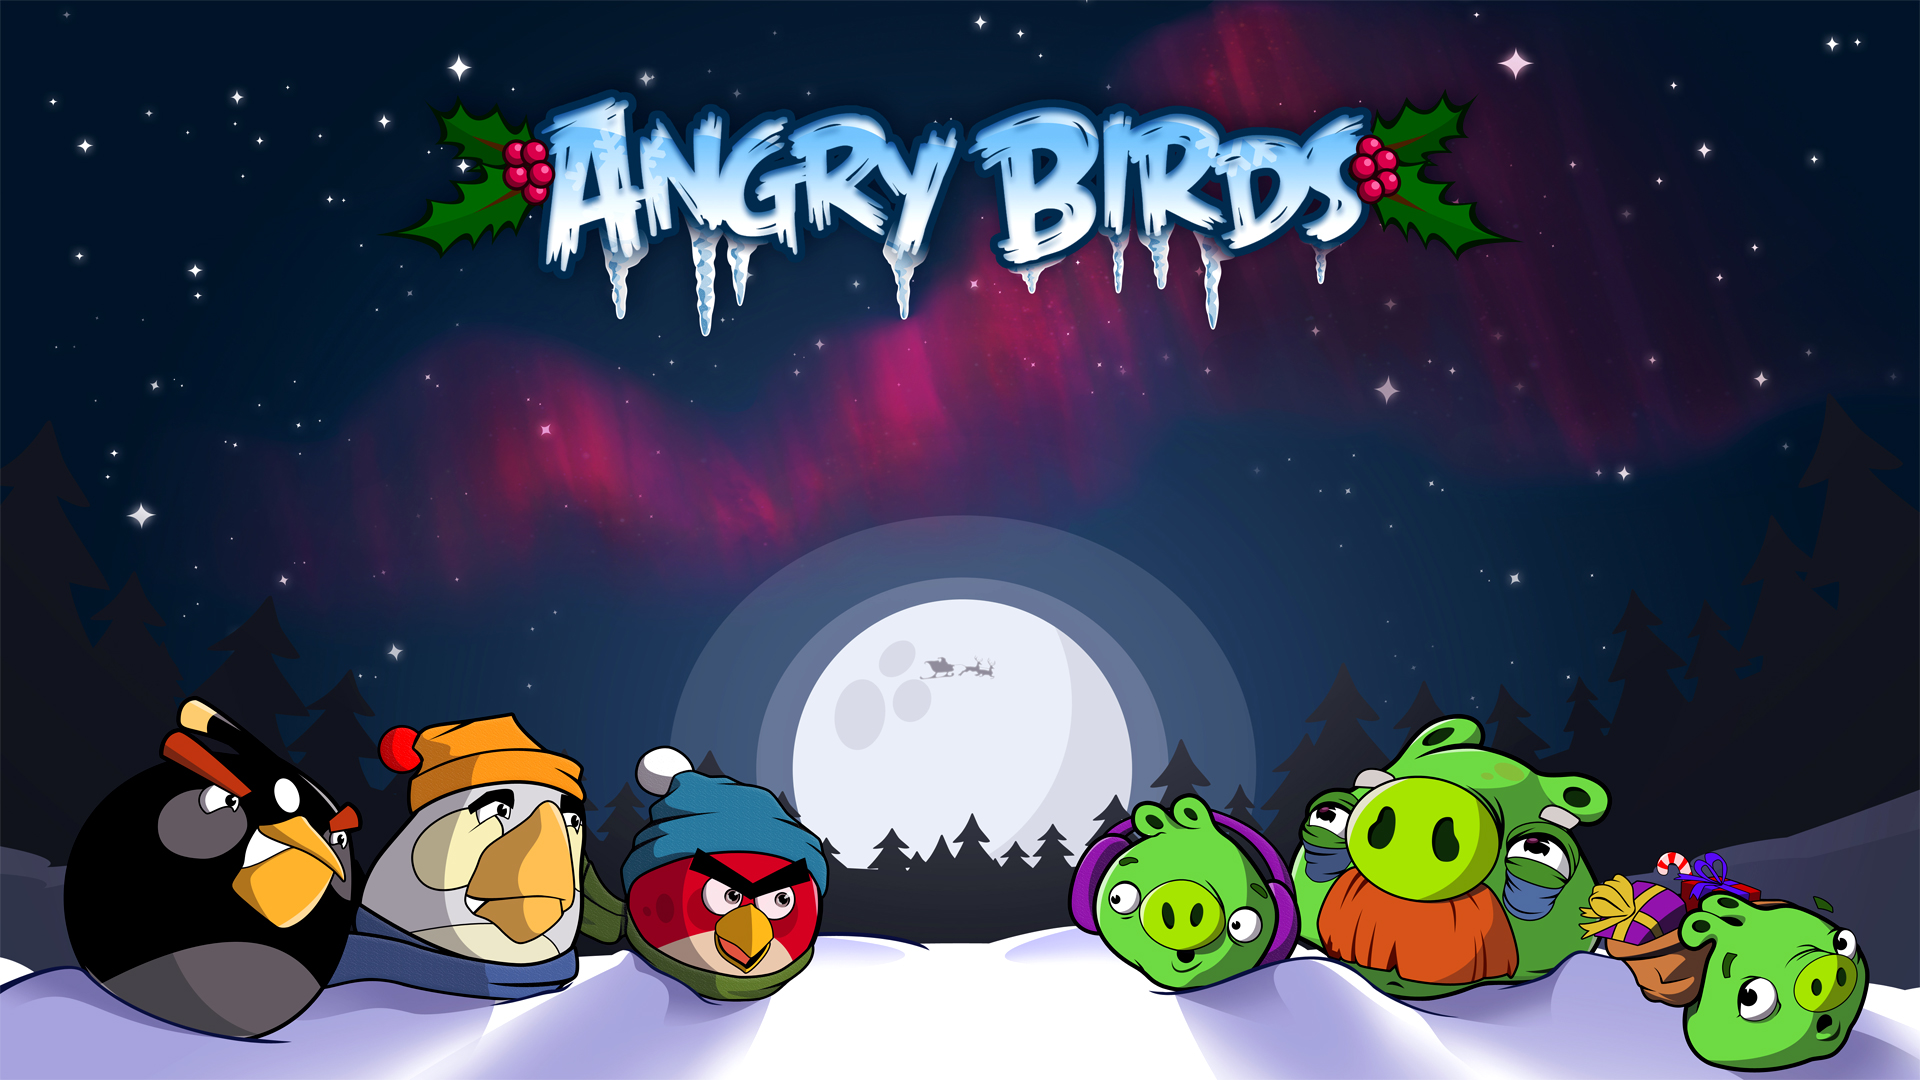 Wallpaper Birds Angry Awesome Cartoon